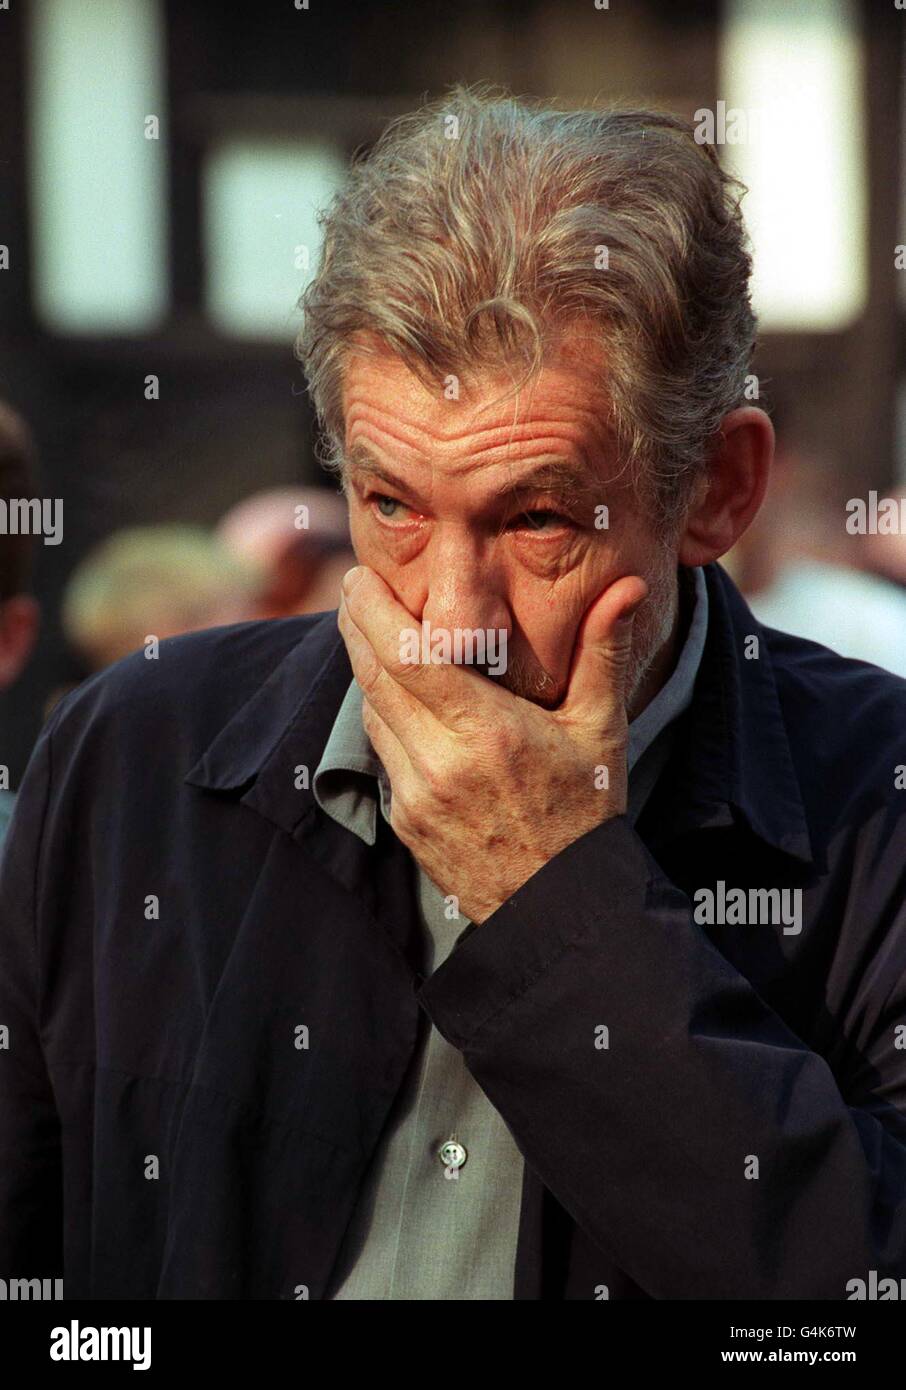 Actor Sir Ian McKellen appears distressed during a vigil in Soho to remember the victims of the April 30 nail bomb explosion in the Admiral Duncan pub. The vigil was organised by the London Gay Men s Choir and held in a leafy Soho Square. Stock Photo